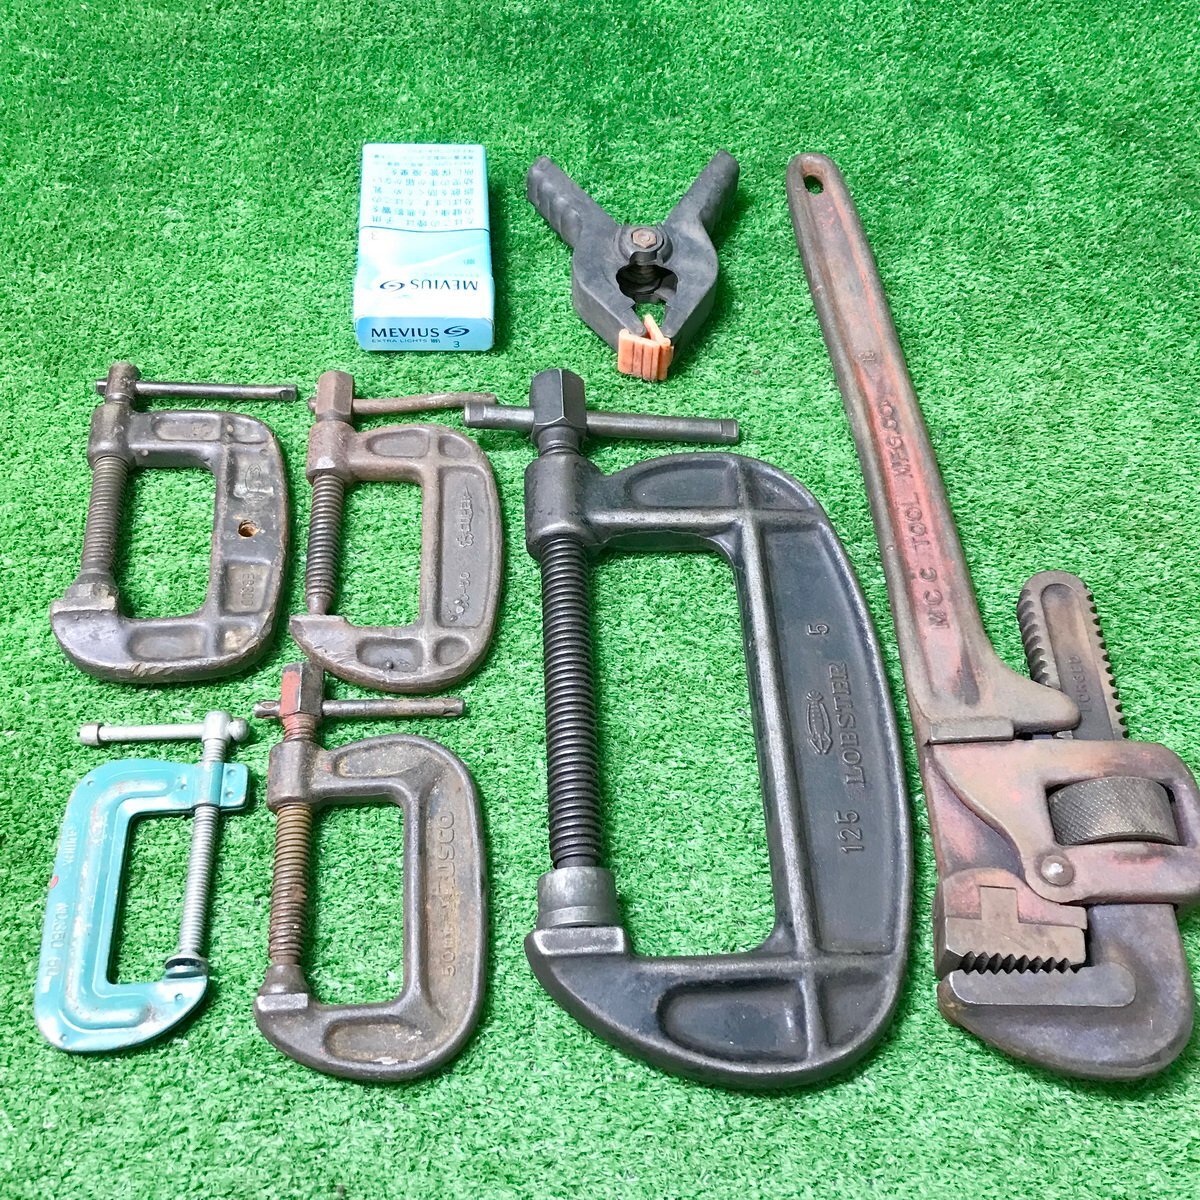 ..c042 lobster /MCC other # aluminium contains C type clamp vise vise 50mm/125mm/450mm pipe wrench pie Len other * total 7 point set!